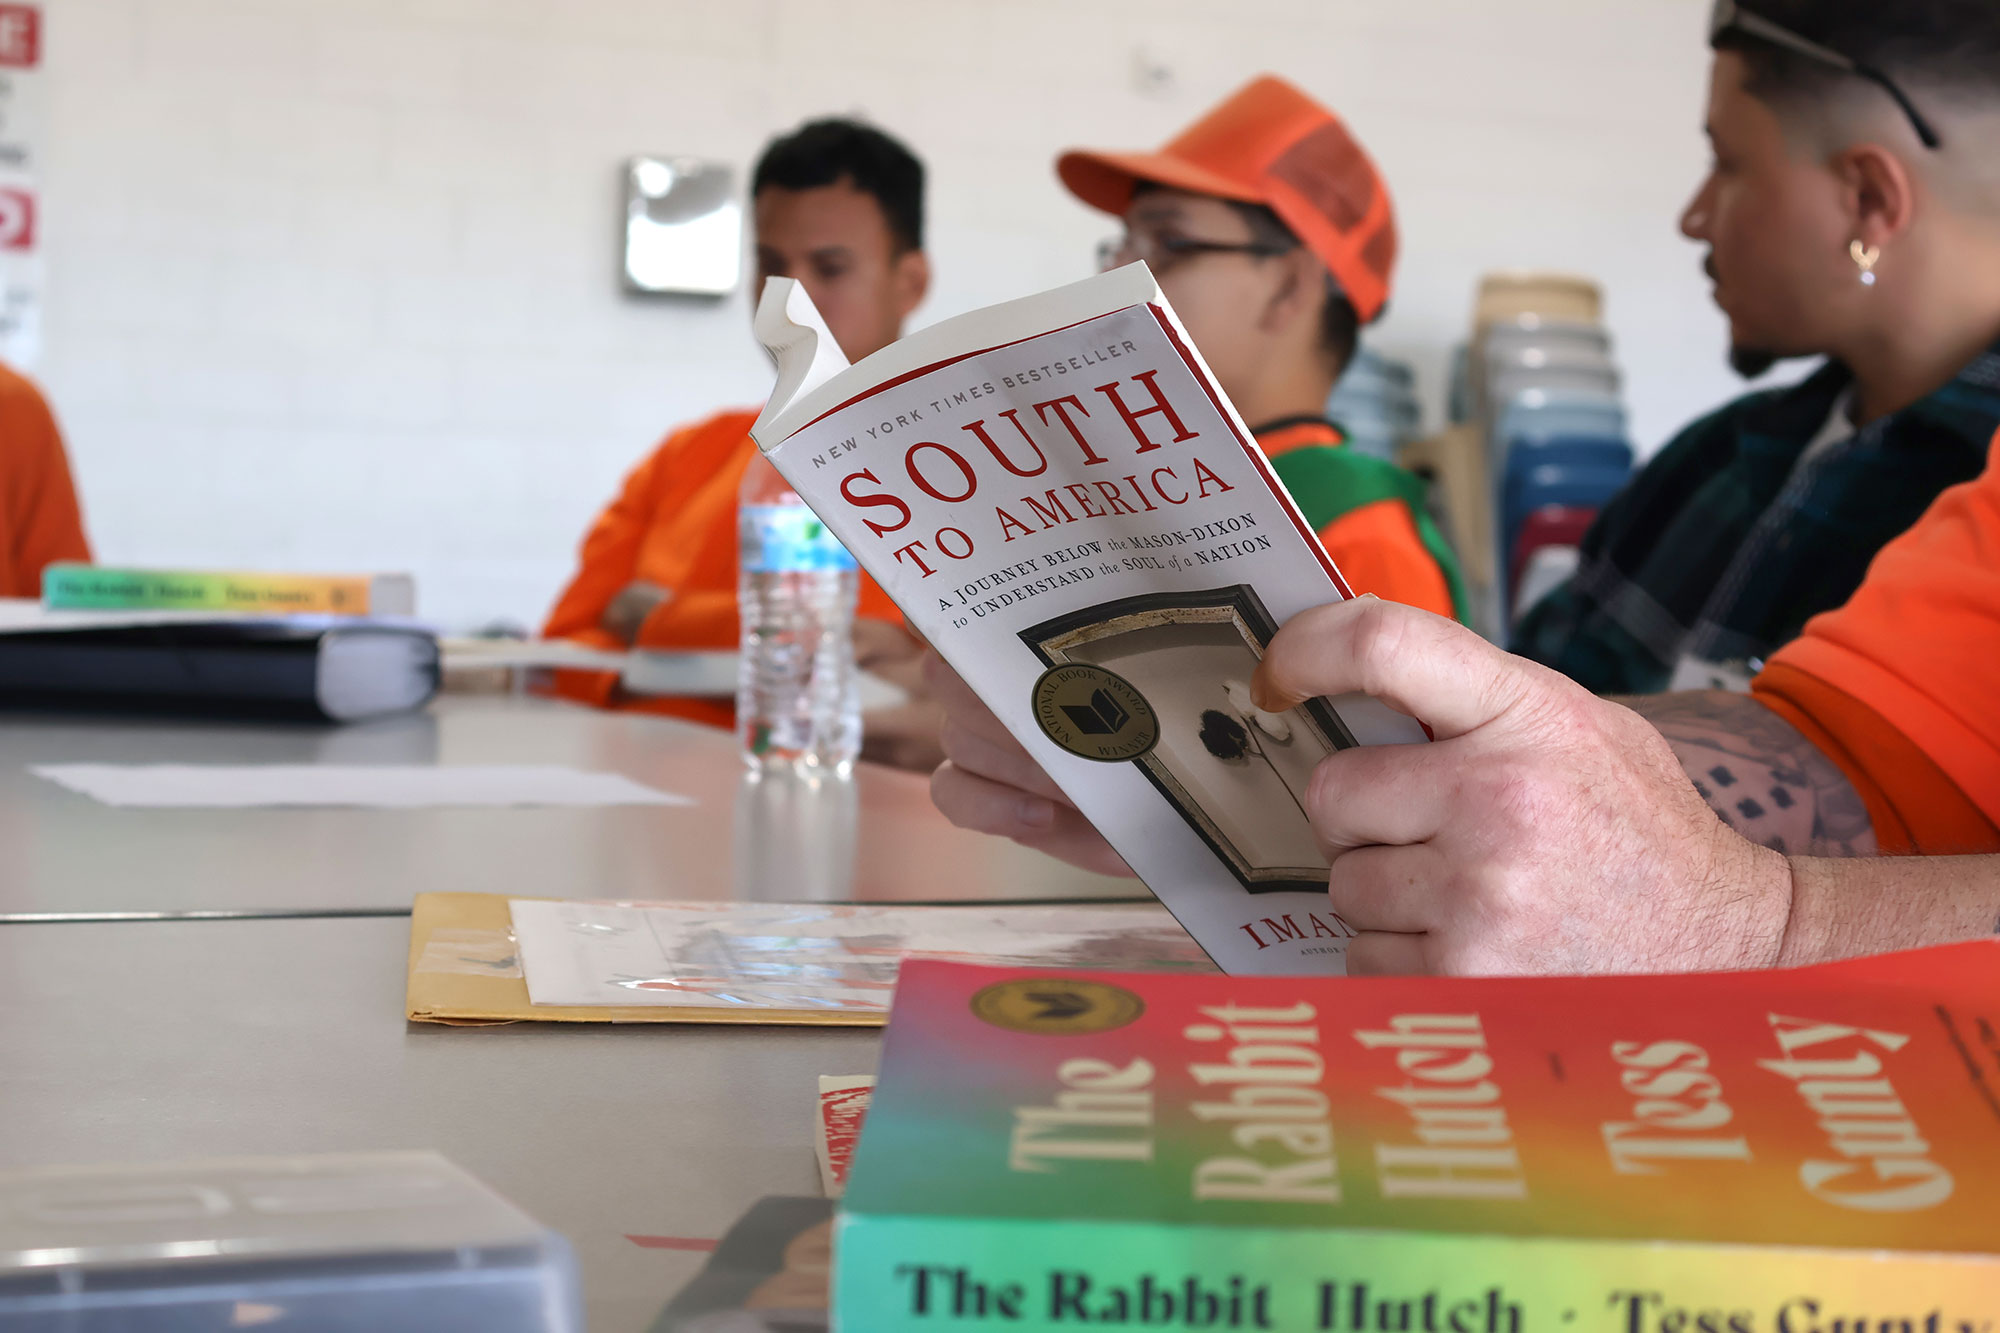 Detail of table with inmates reading and discussing South to America by Imani Perry and The Rabbit Hutch by Tess Gunty